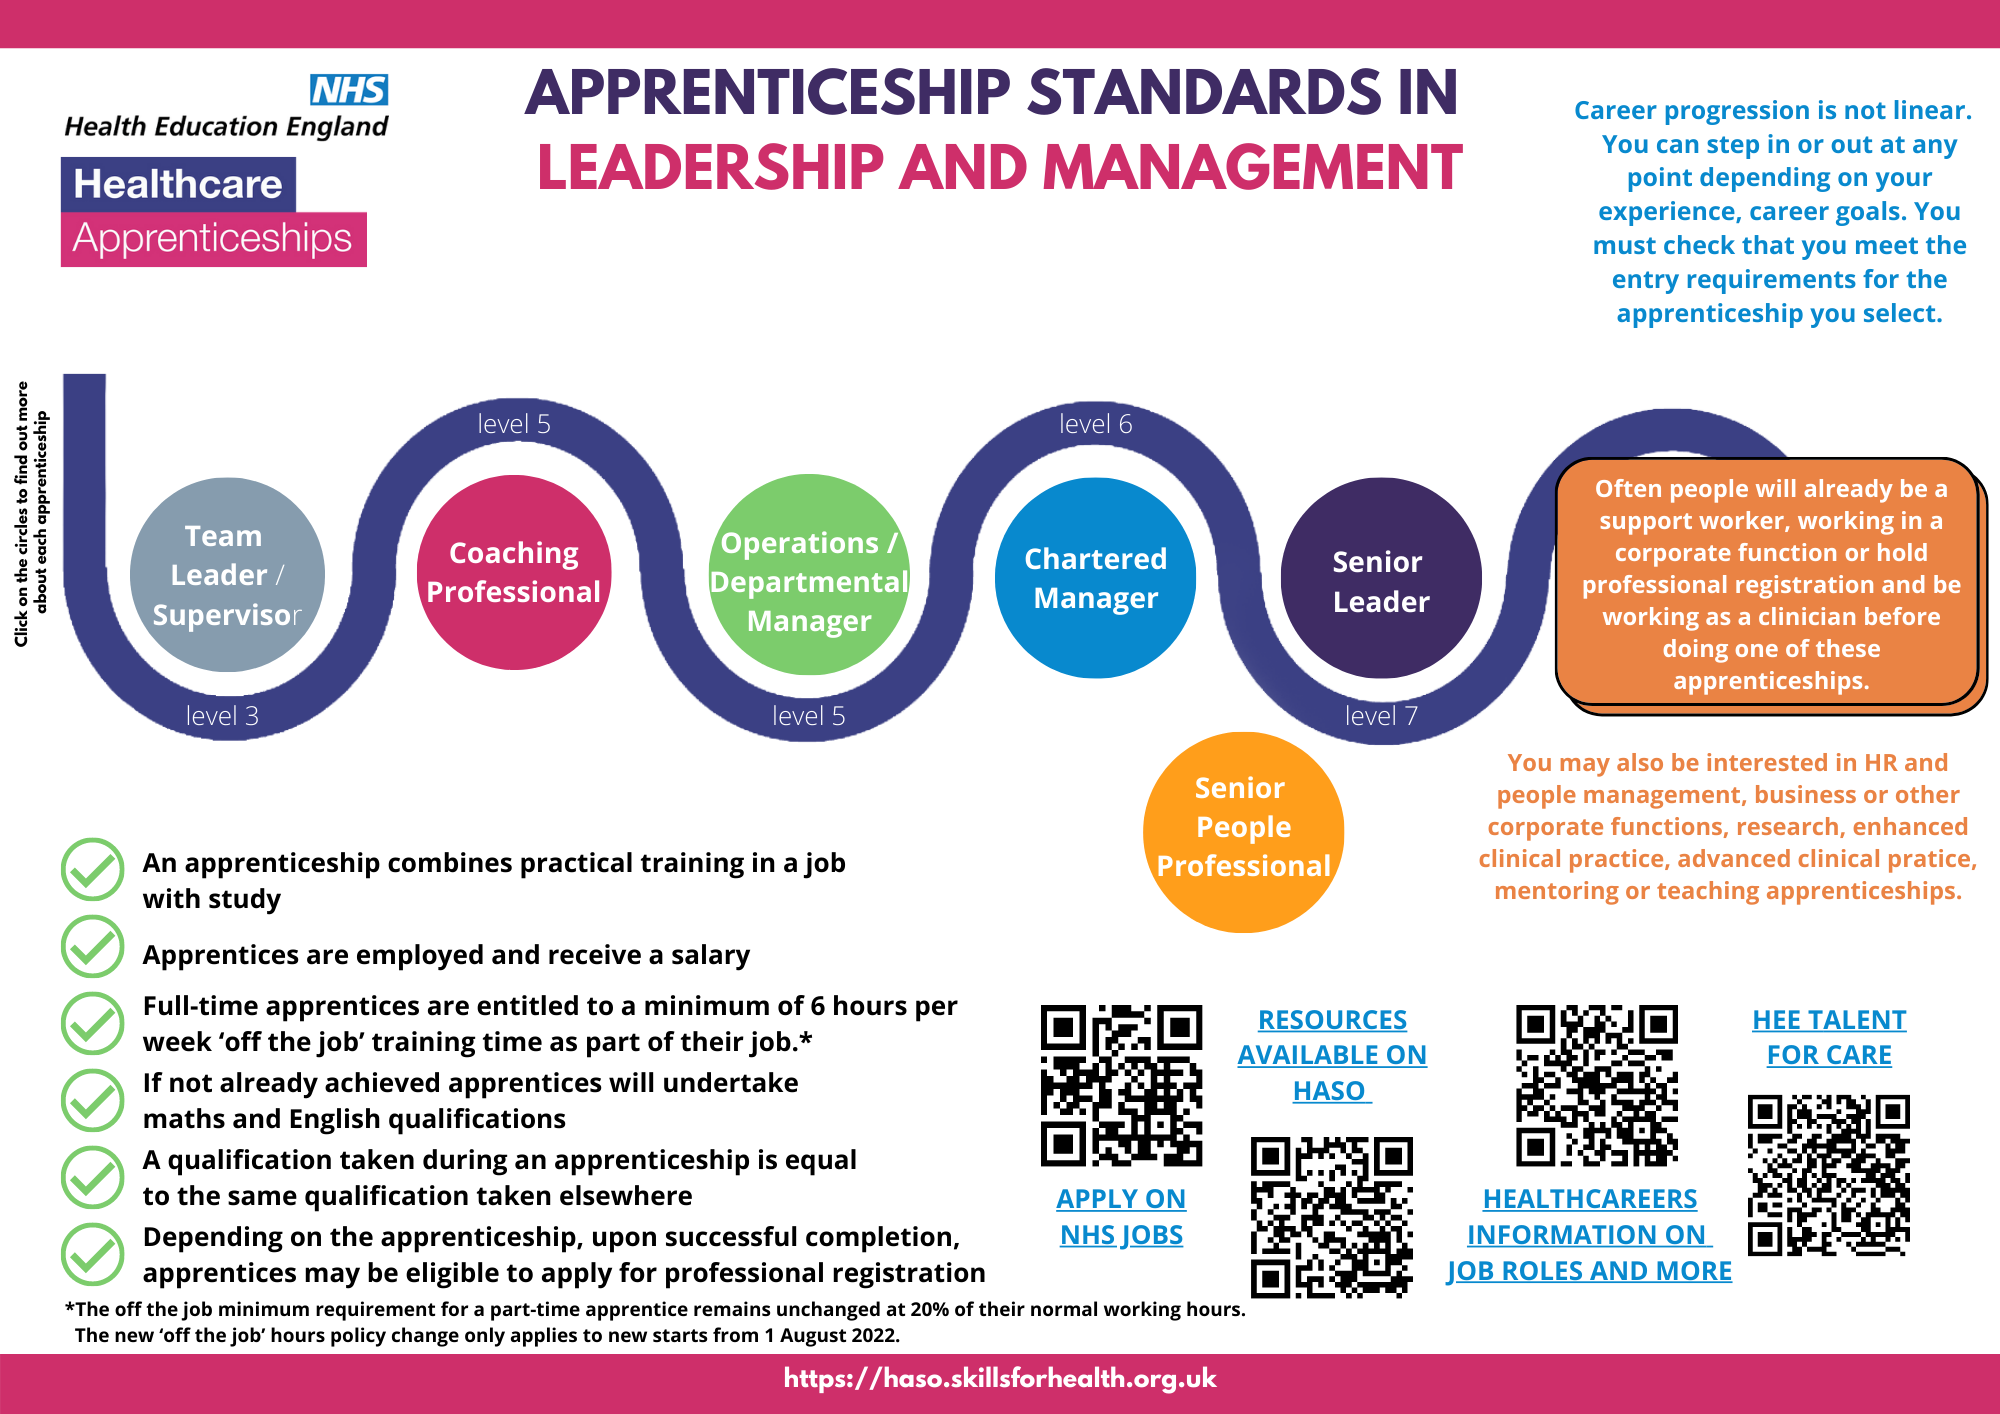 Leadership and Management apprenticeship standard factsheet which shows the relevant apprenticeships. This information is also listed on the Leadership and Management page: https://haso.skillsforhealth.org.uk/leadership-and-management/